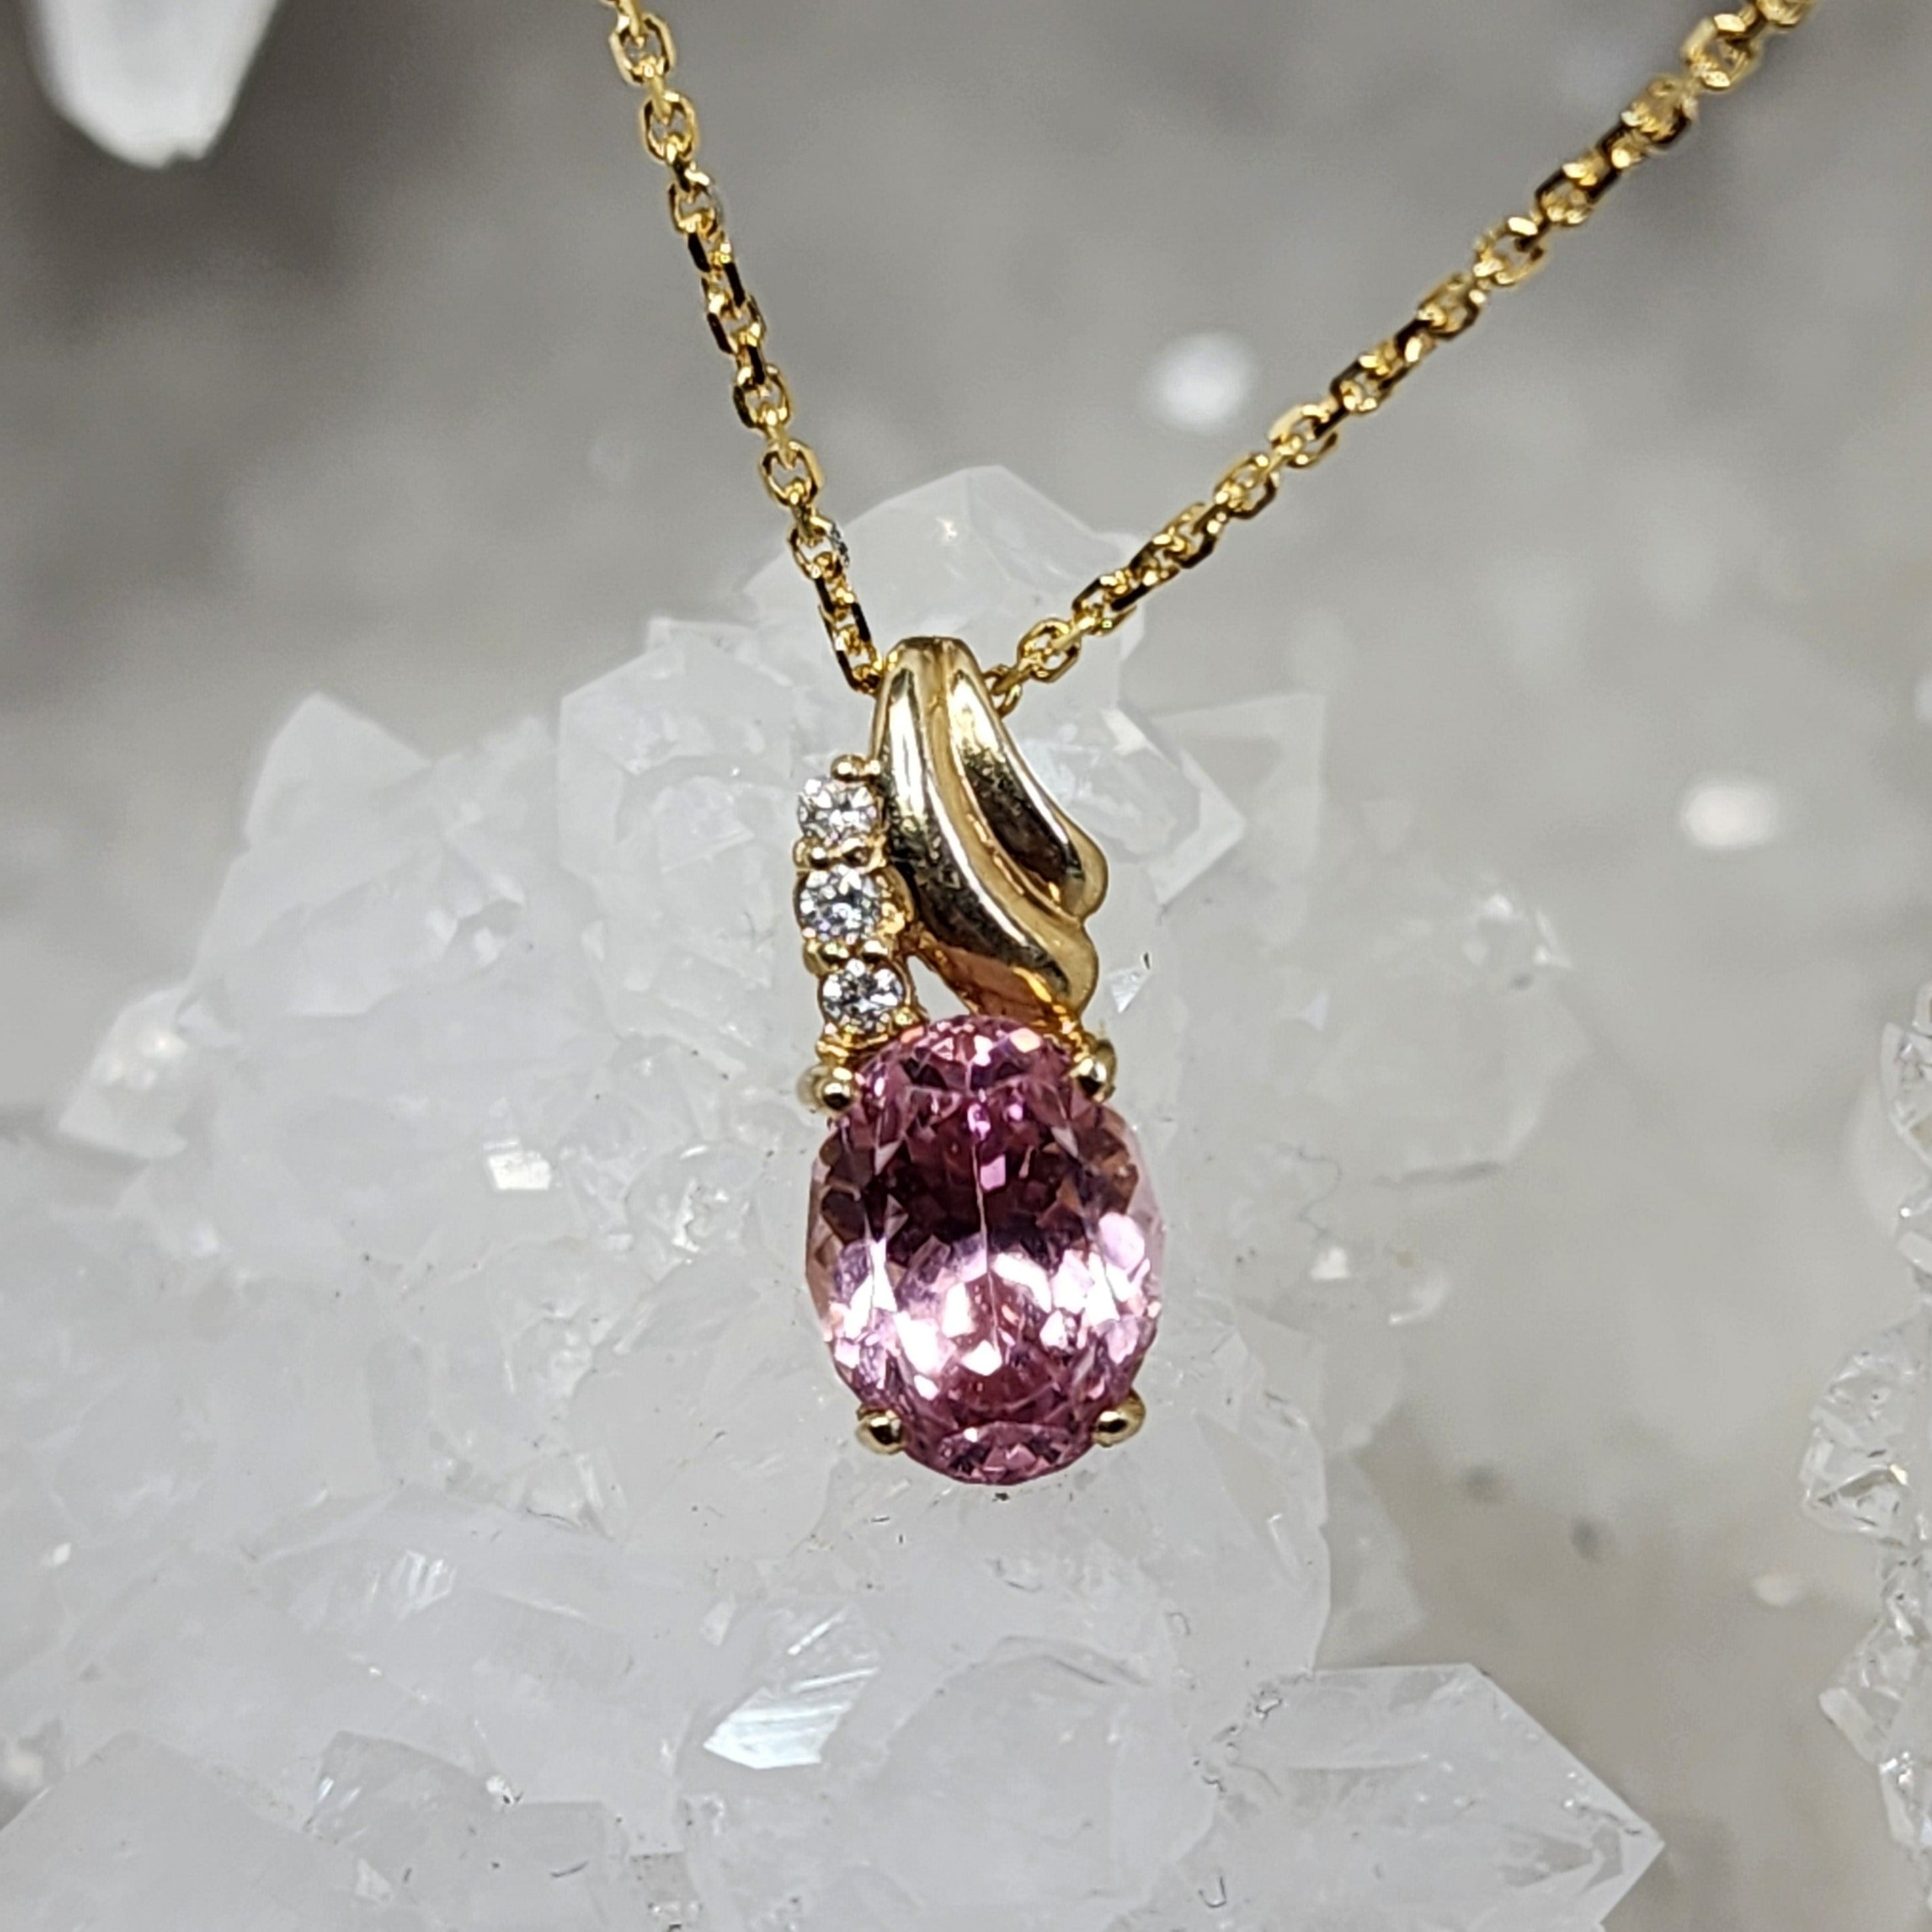 1.0 ctw Light Pink Sapphire and Diamond Pendant in 14K White Gold